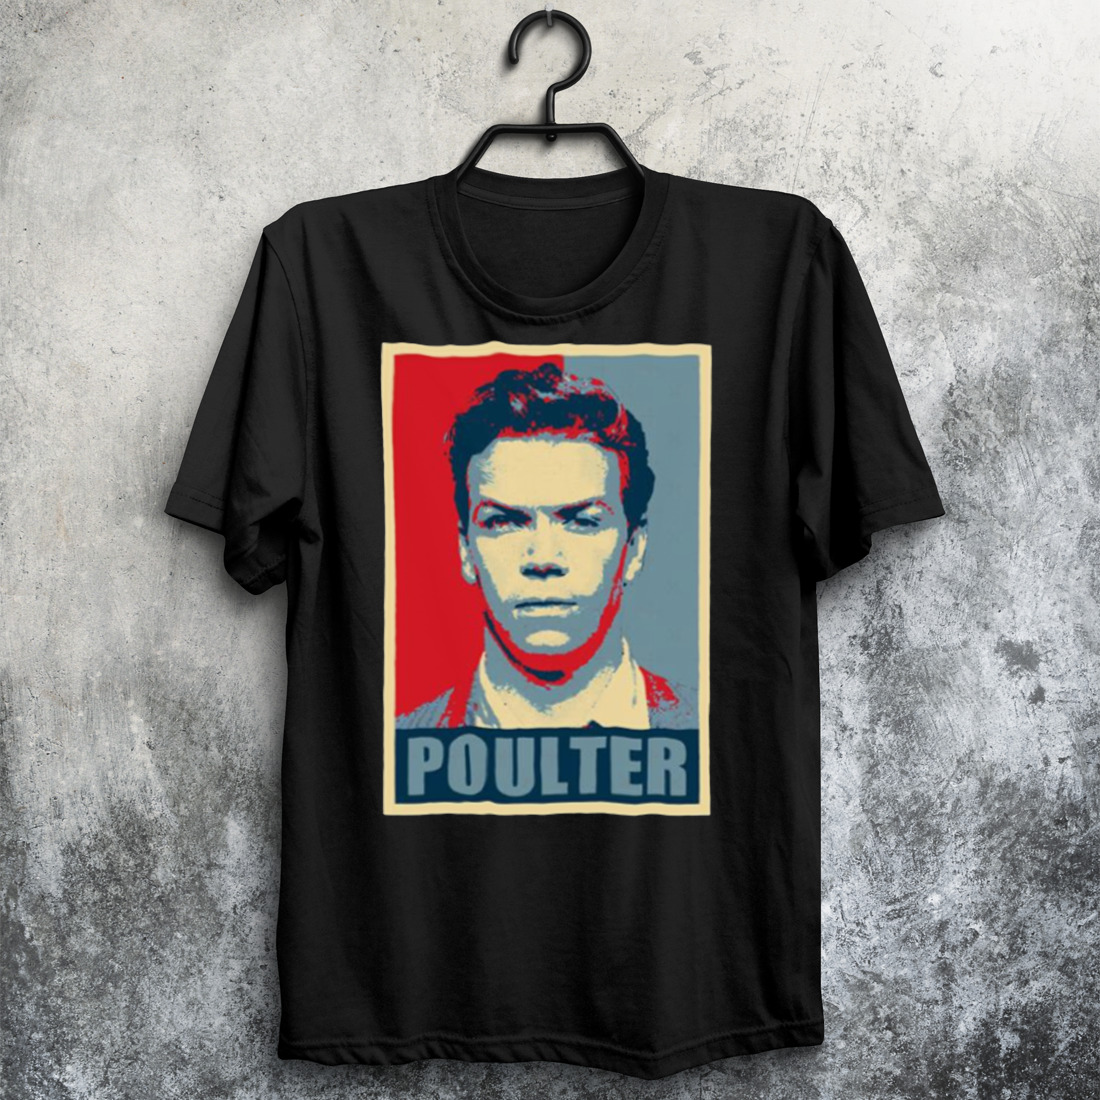 Will Poulter Hope Graphic shirt